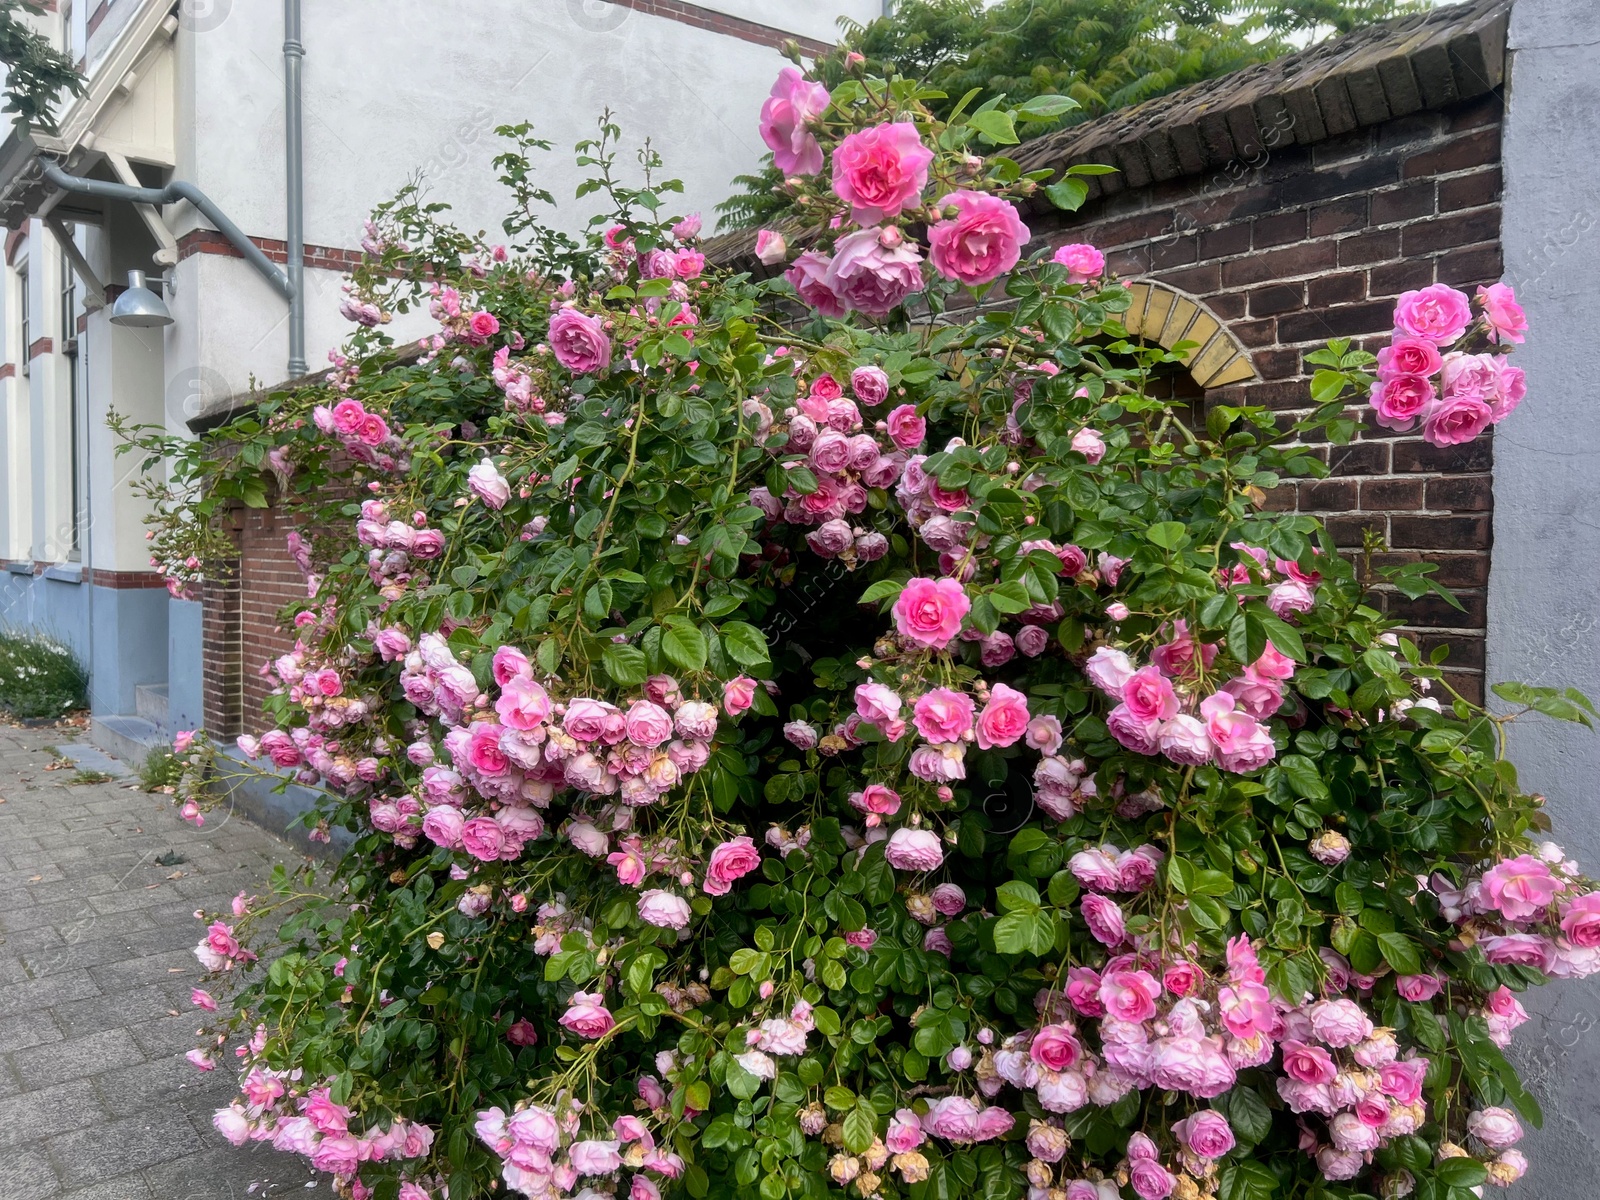 Photo of Bush with beautiful pink roses blooming on city street